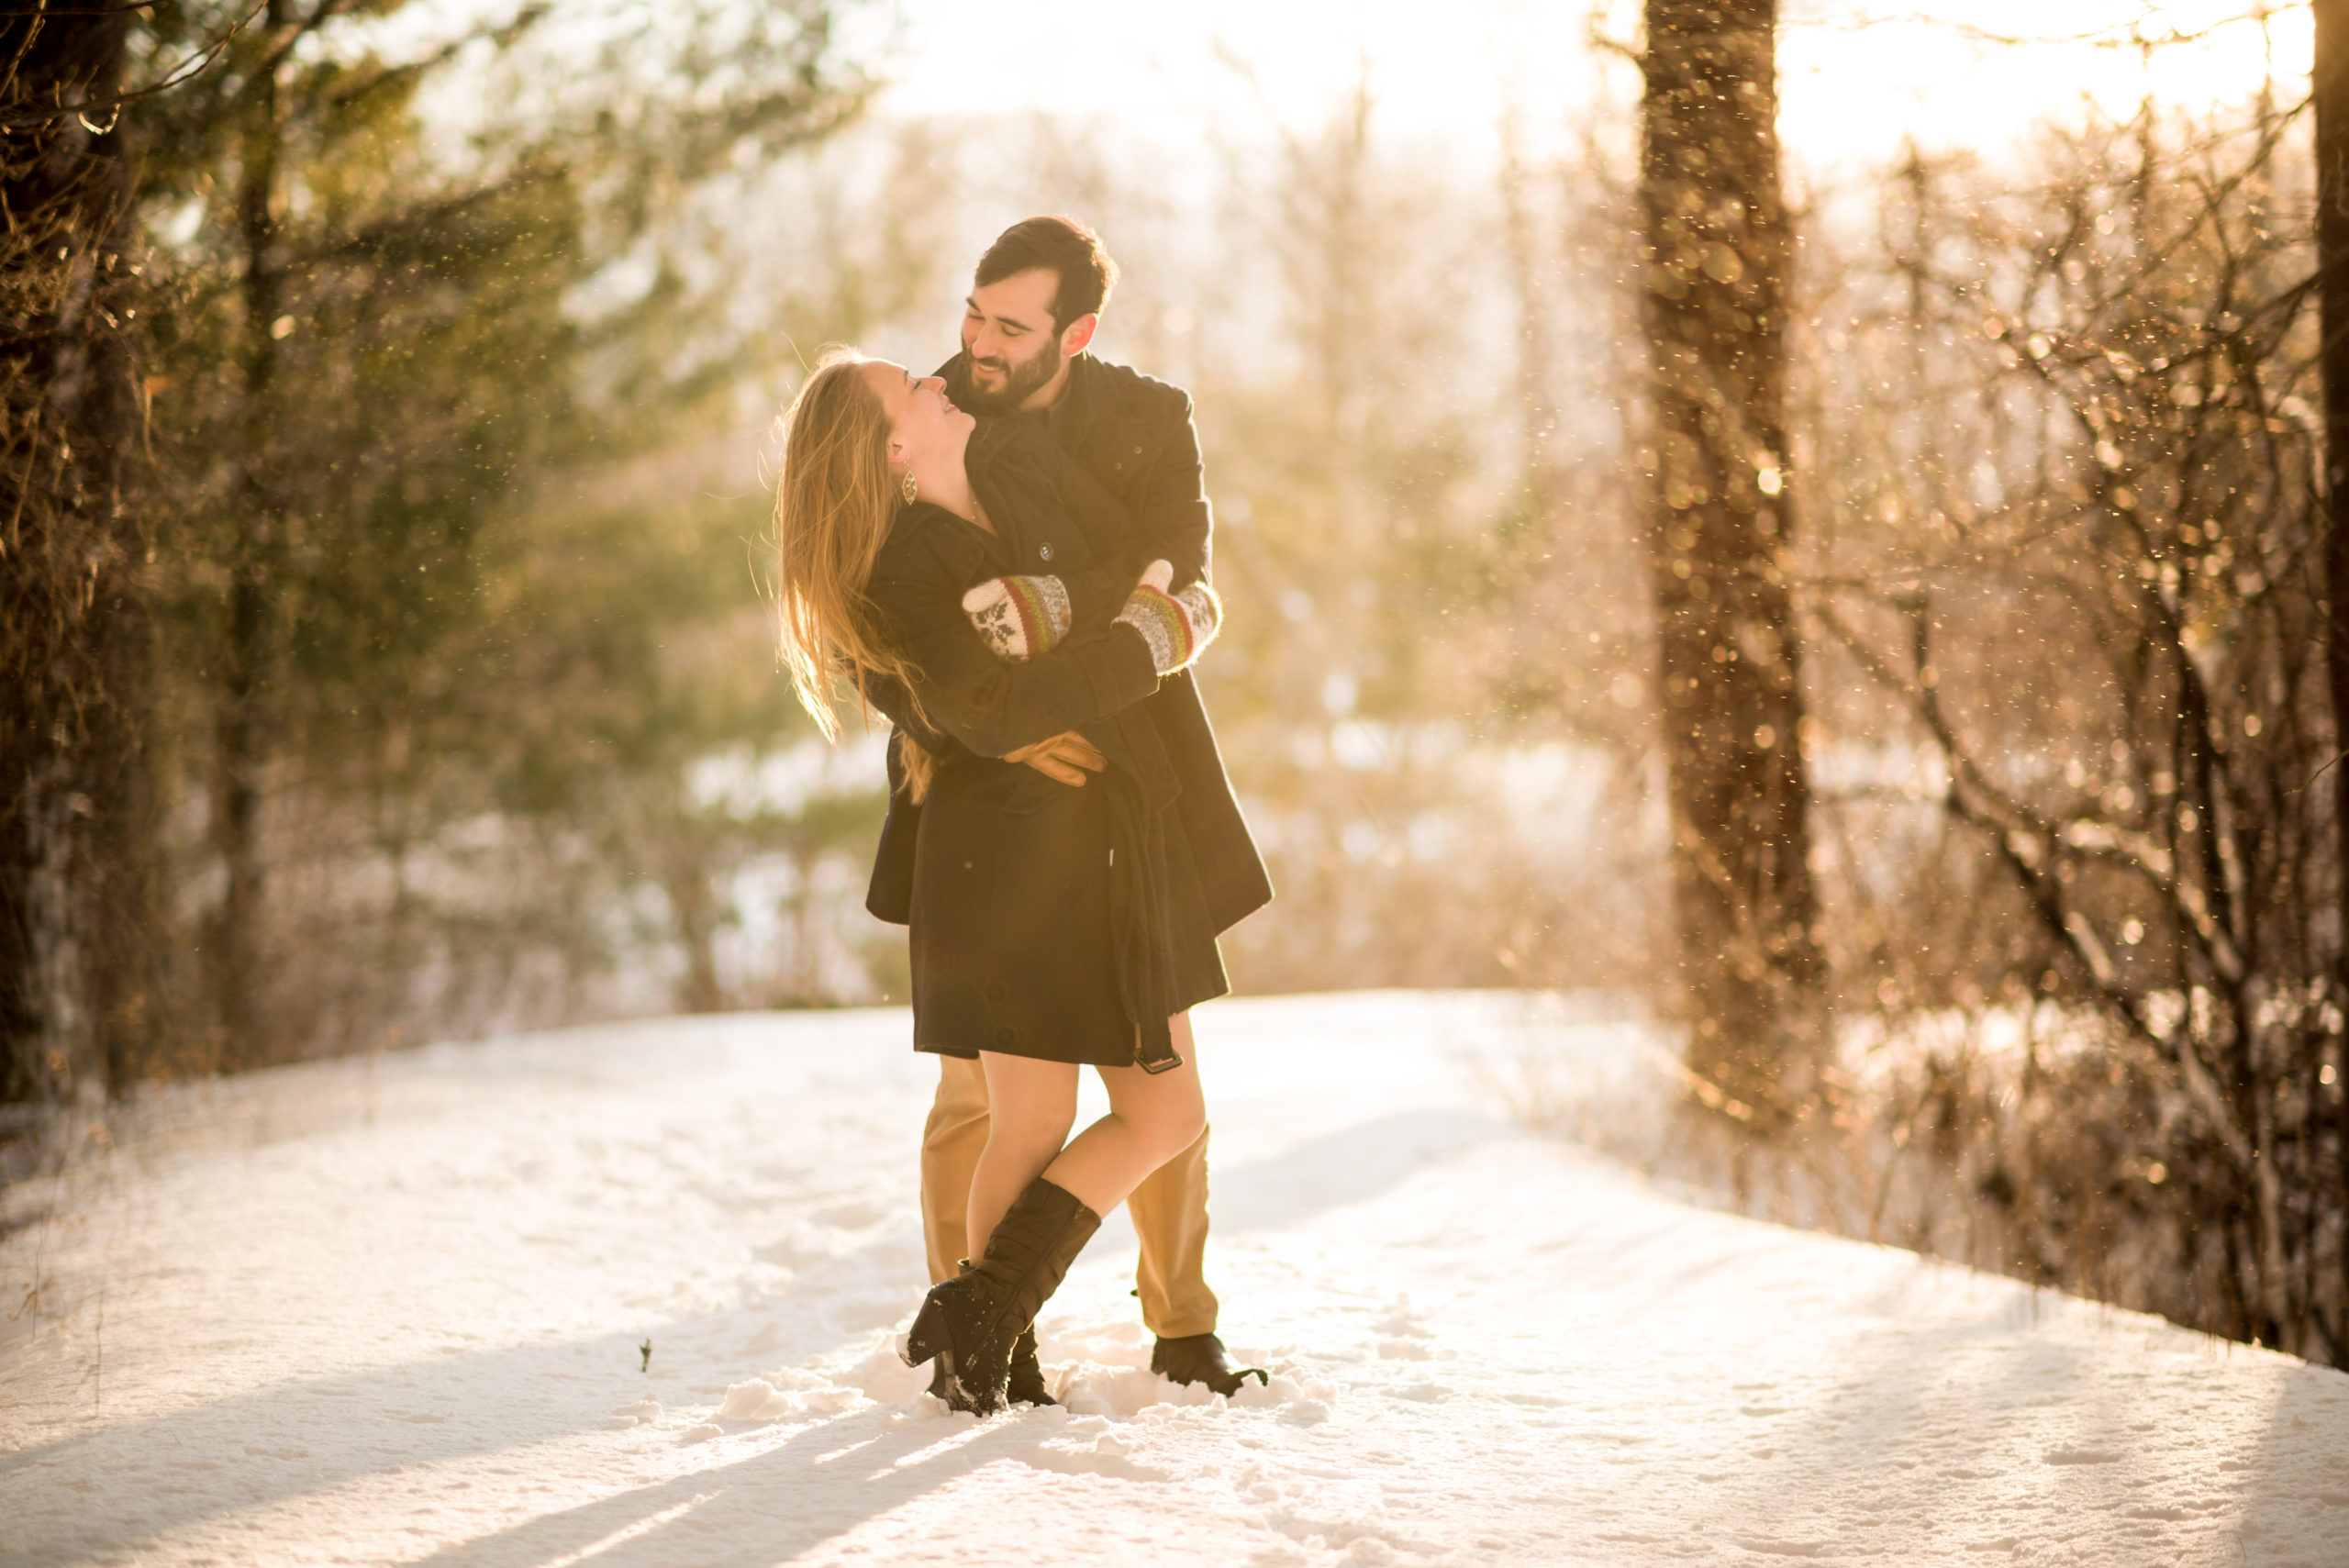 6 tips : How to dress for your winter senior photo session